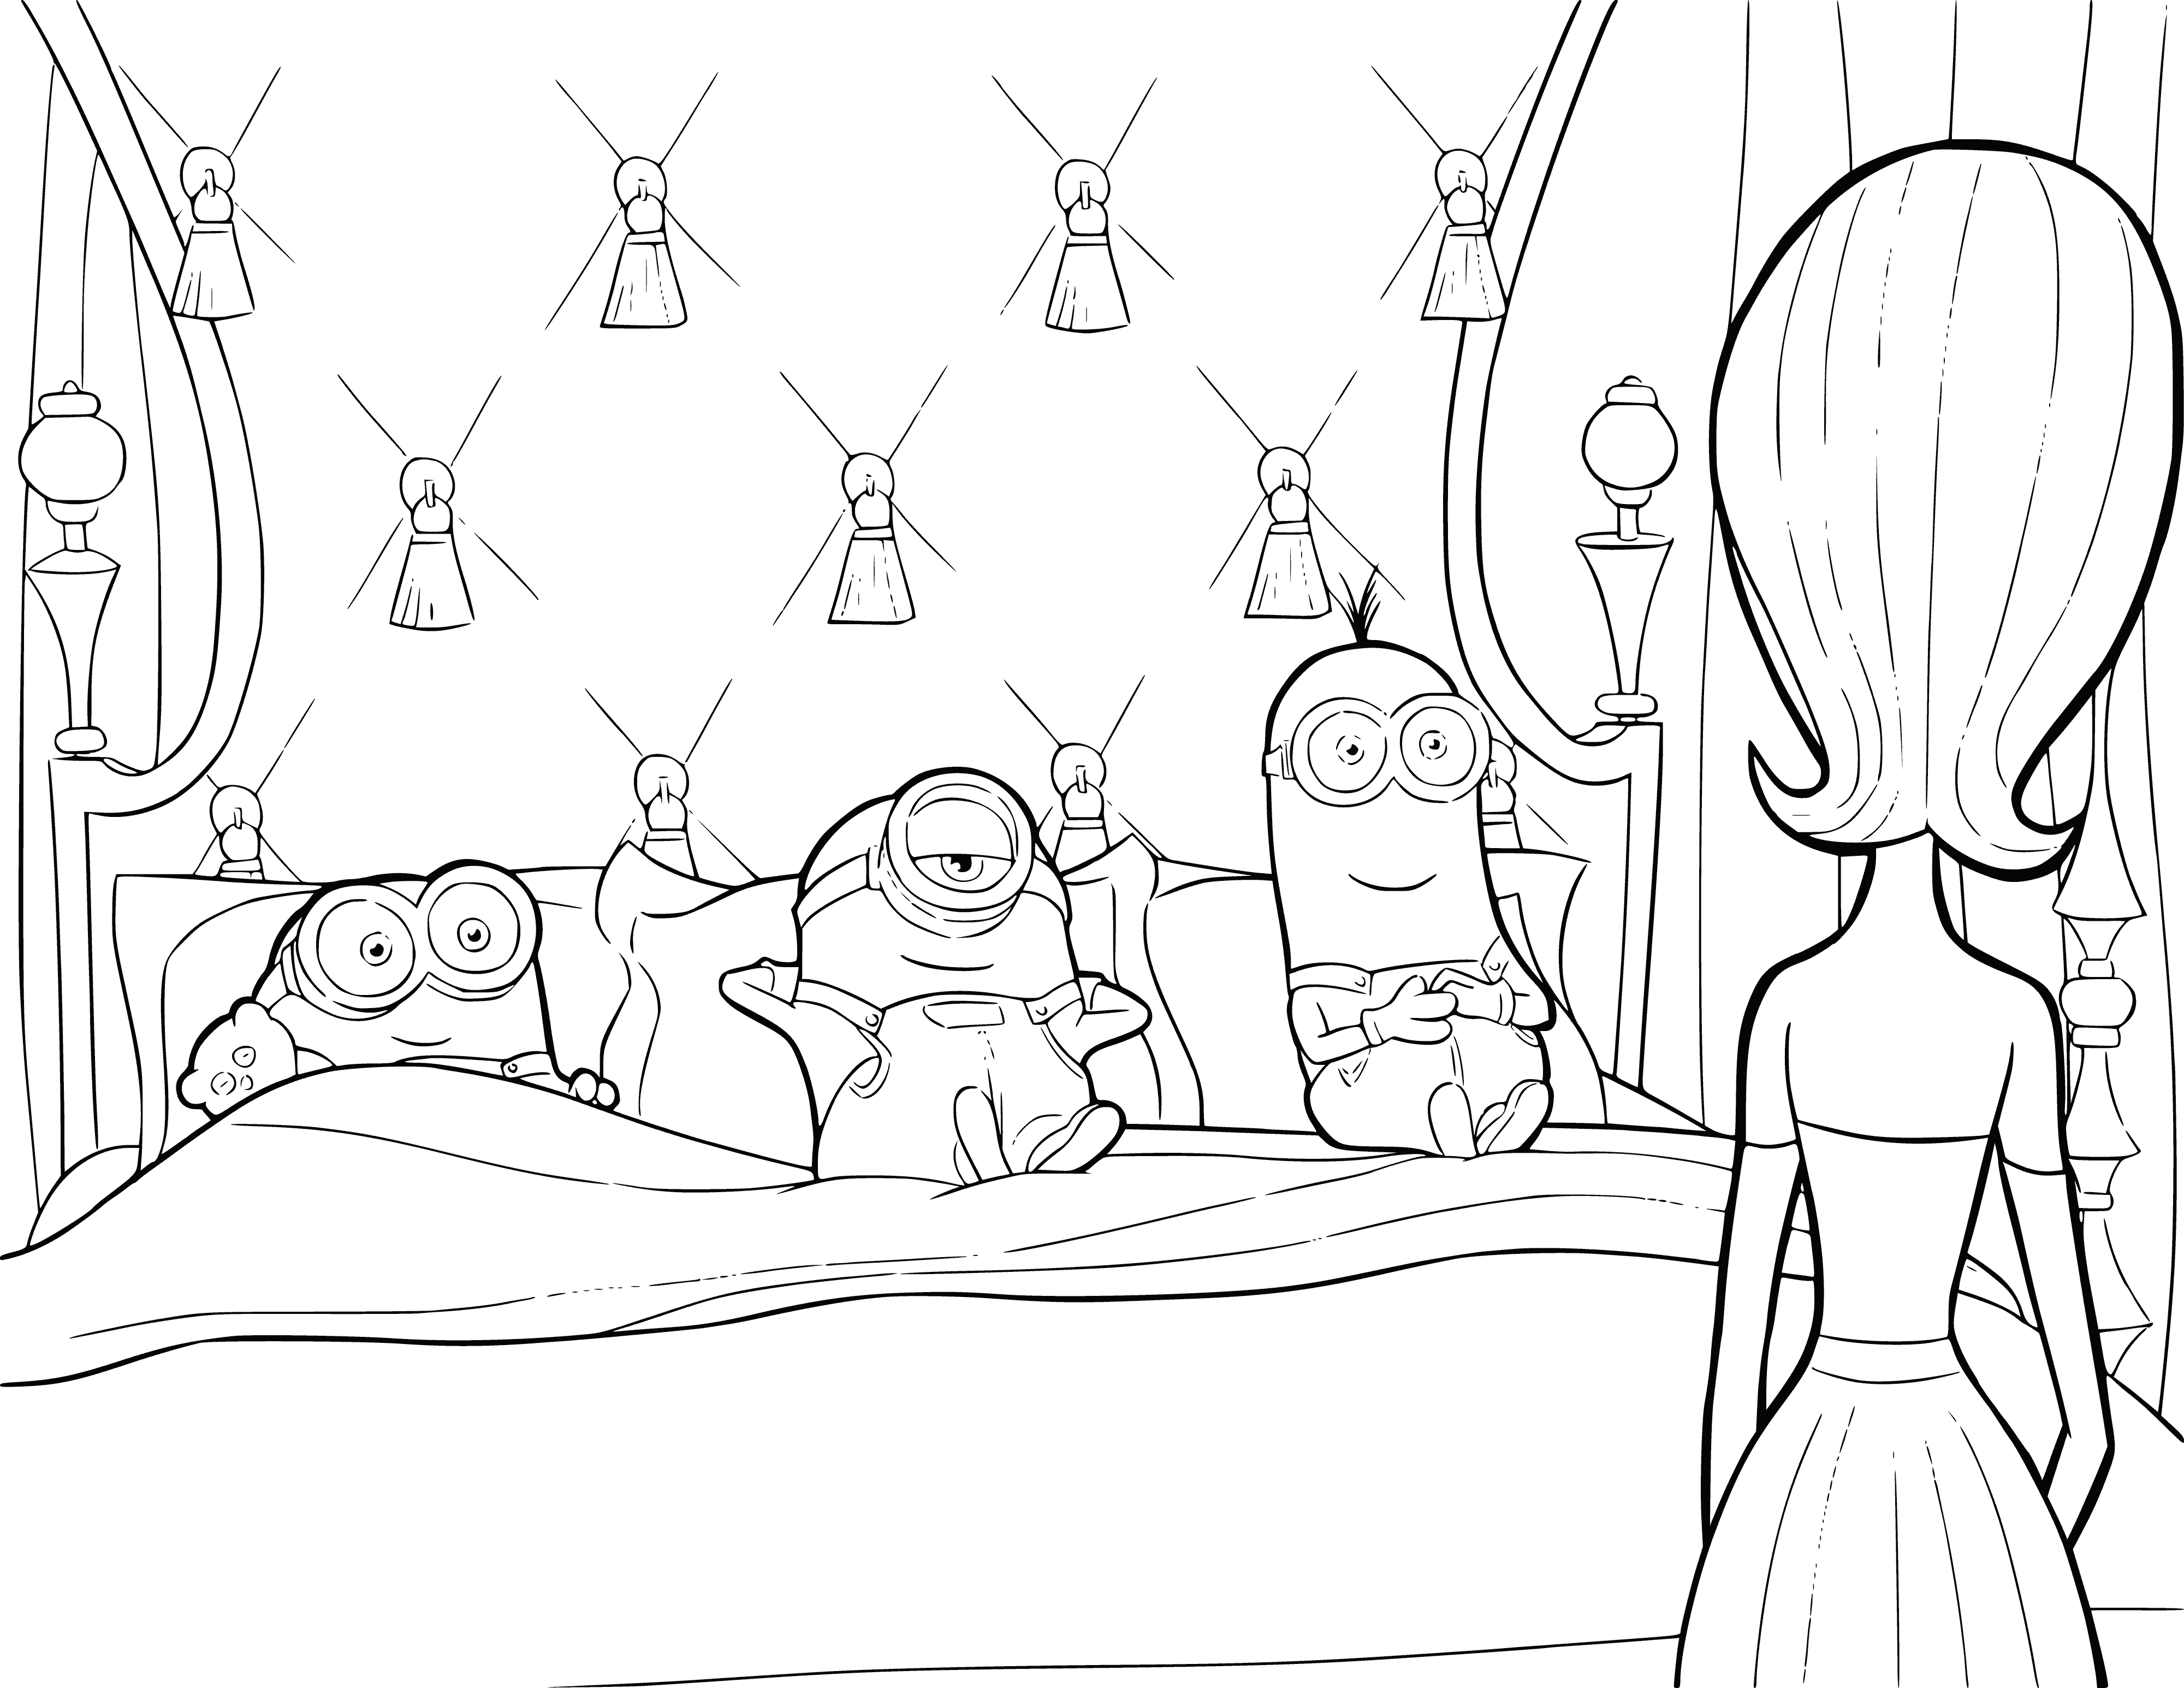 Minions in bed coloring page